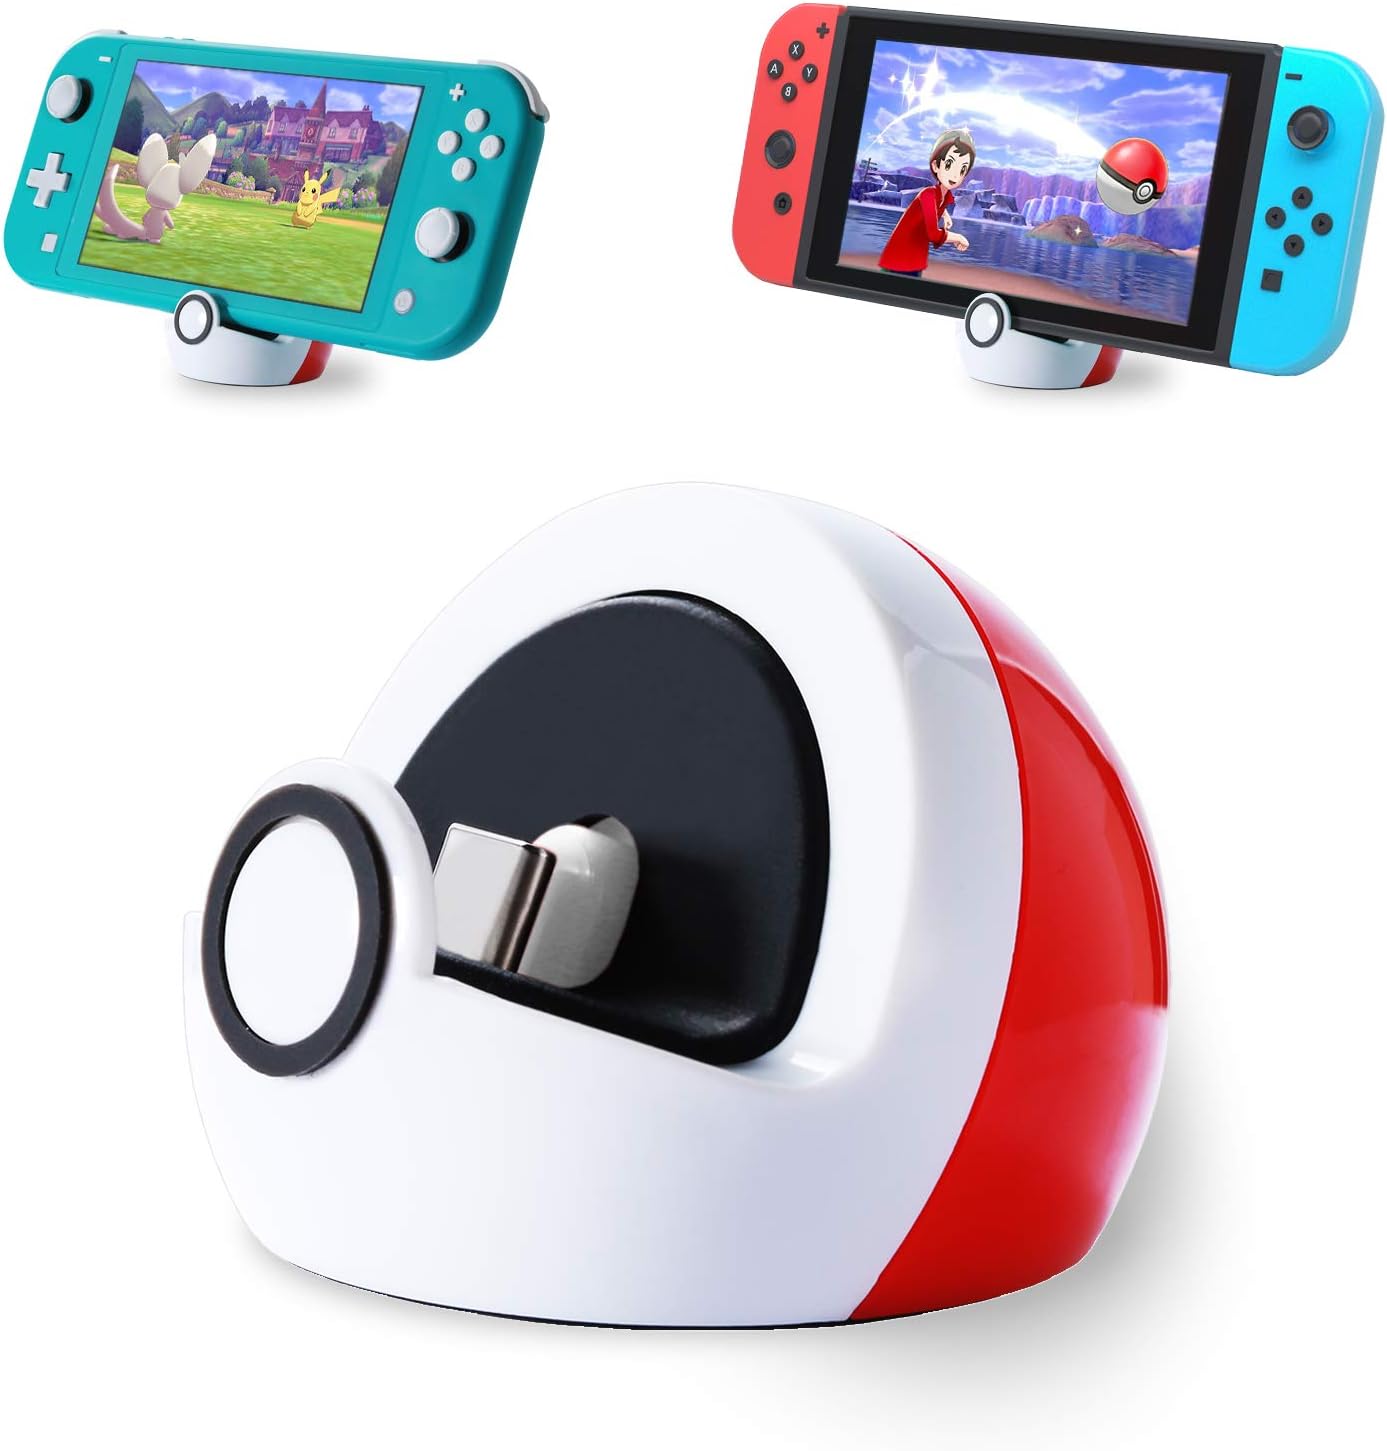 Mini Charging Stand for Nintendo Switch/Switch Lite/Switch OLED, Portable Cute Switch Dock Station with USB-C Port for Switch Gaming